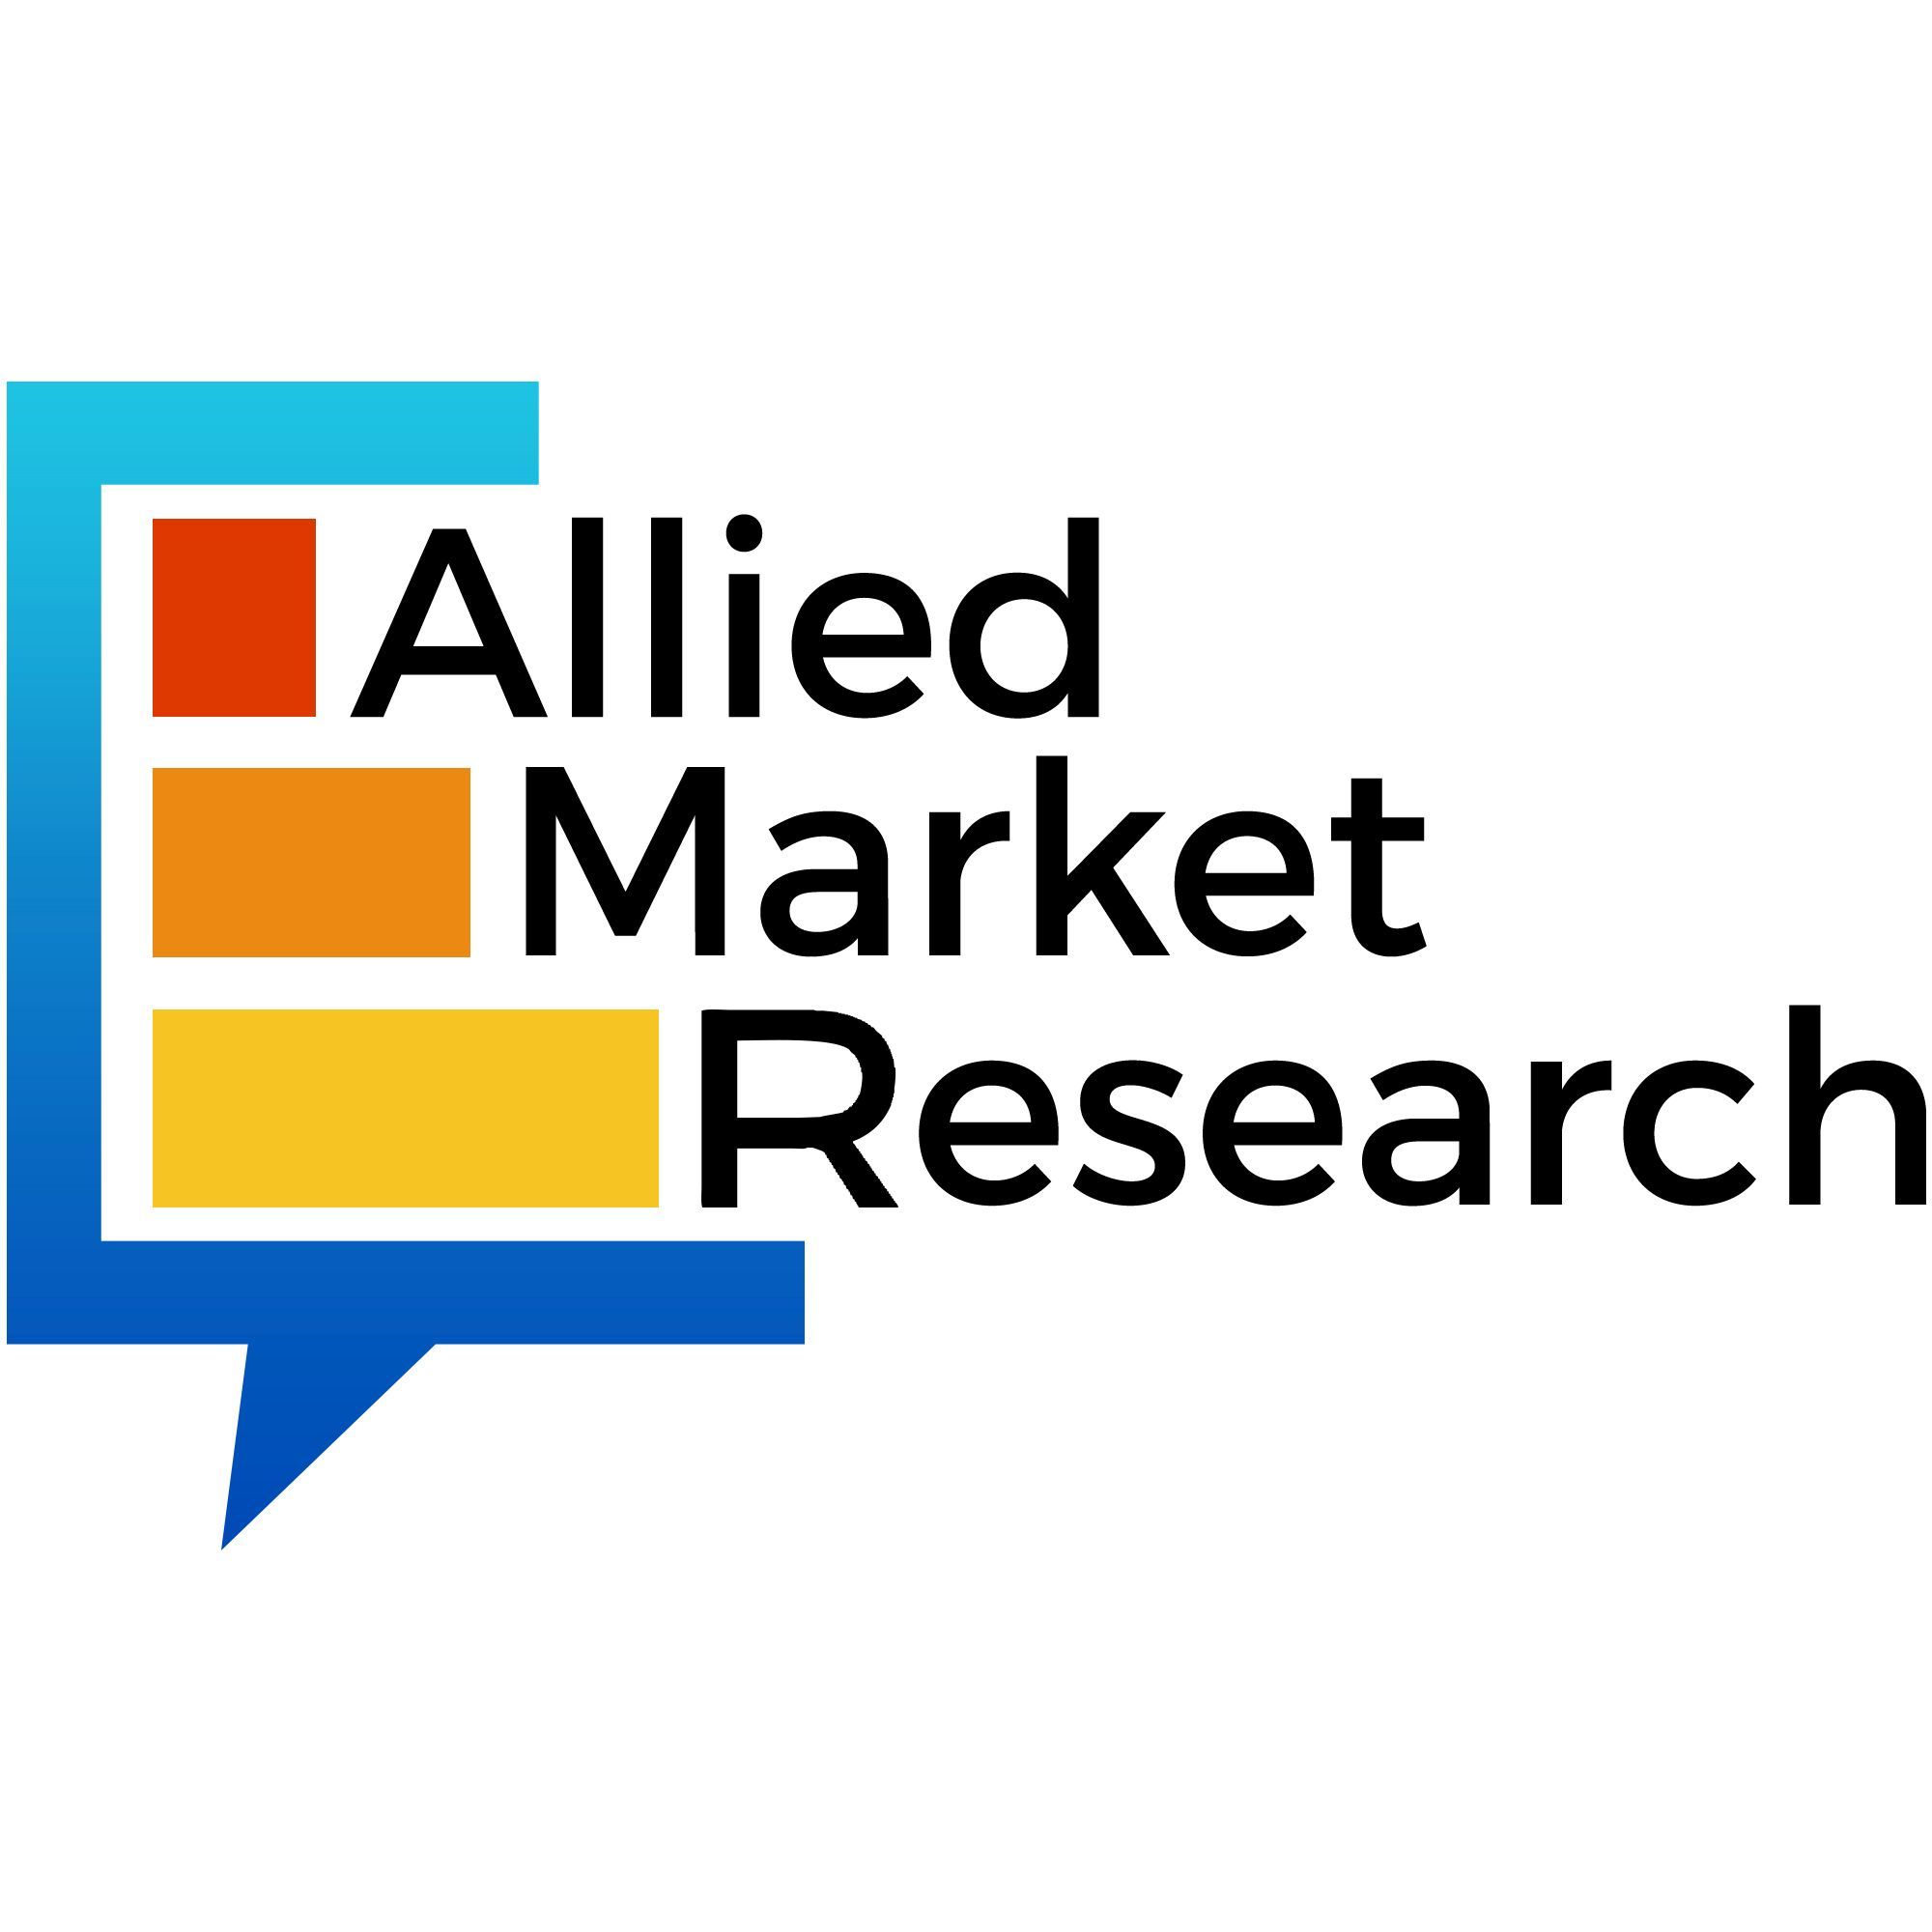 USB Retimer Market Projected to Reach $1.4 Billion, Globally, By 2031 at 17.9% CAGR: Allied Market Research